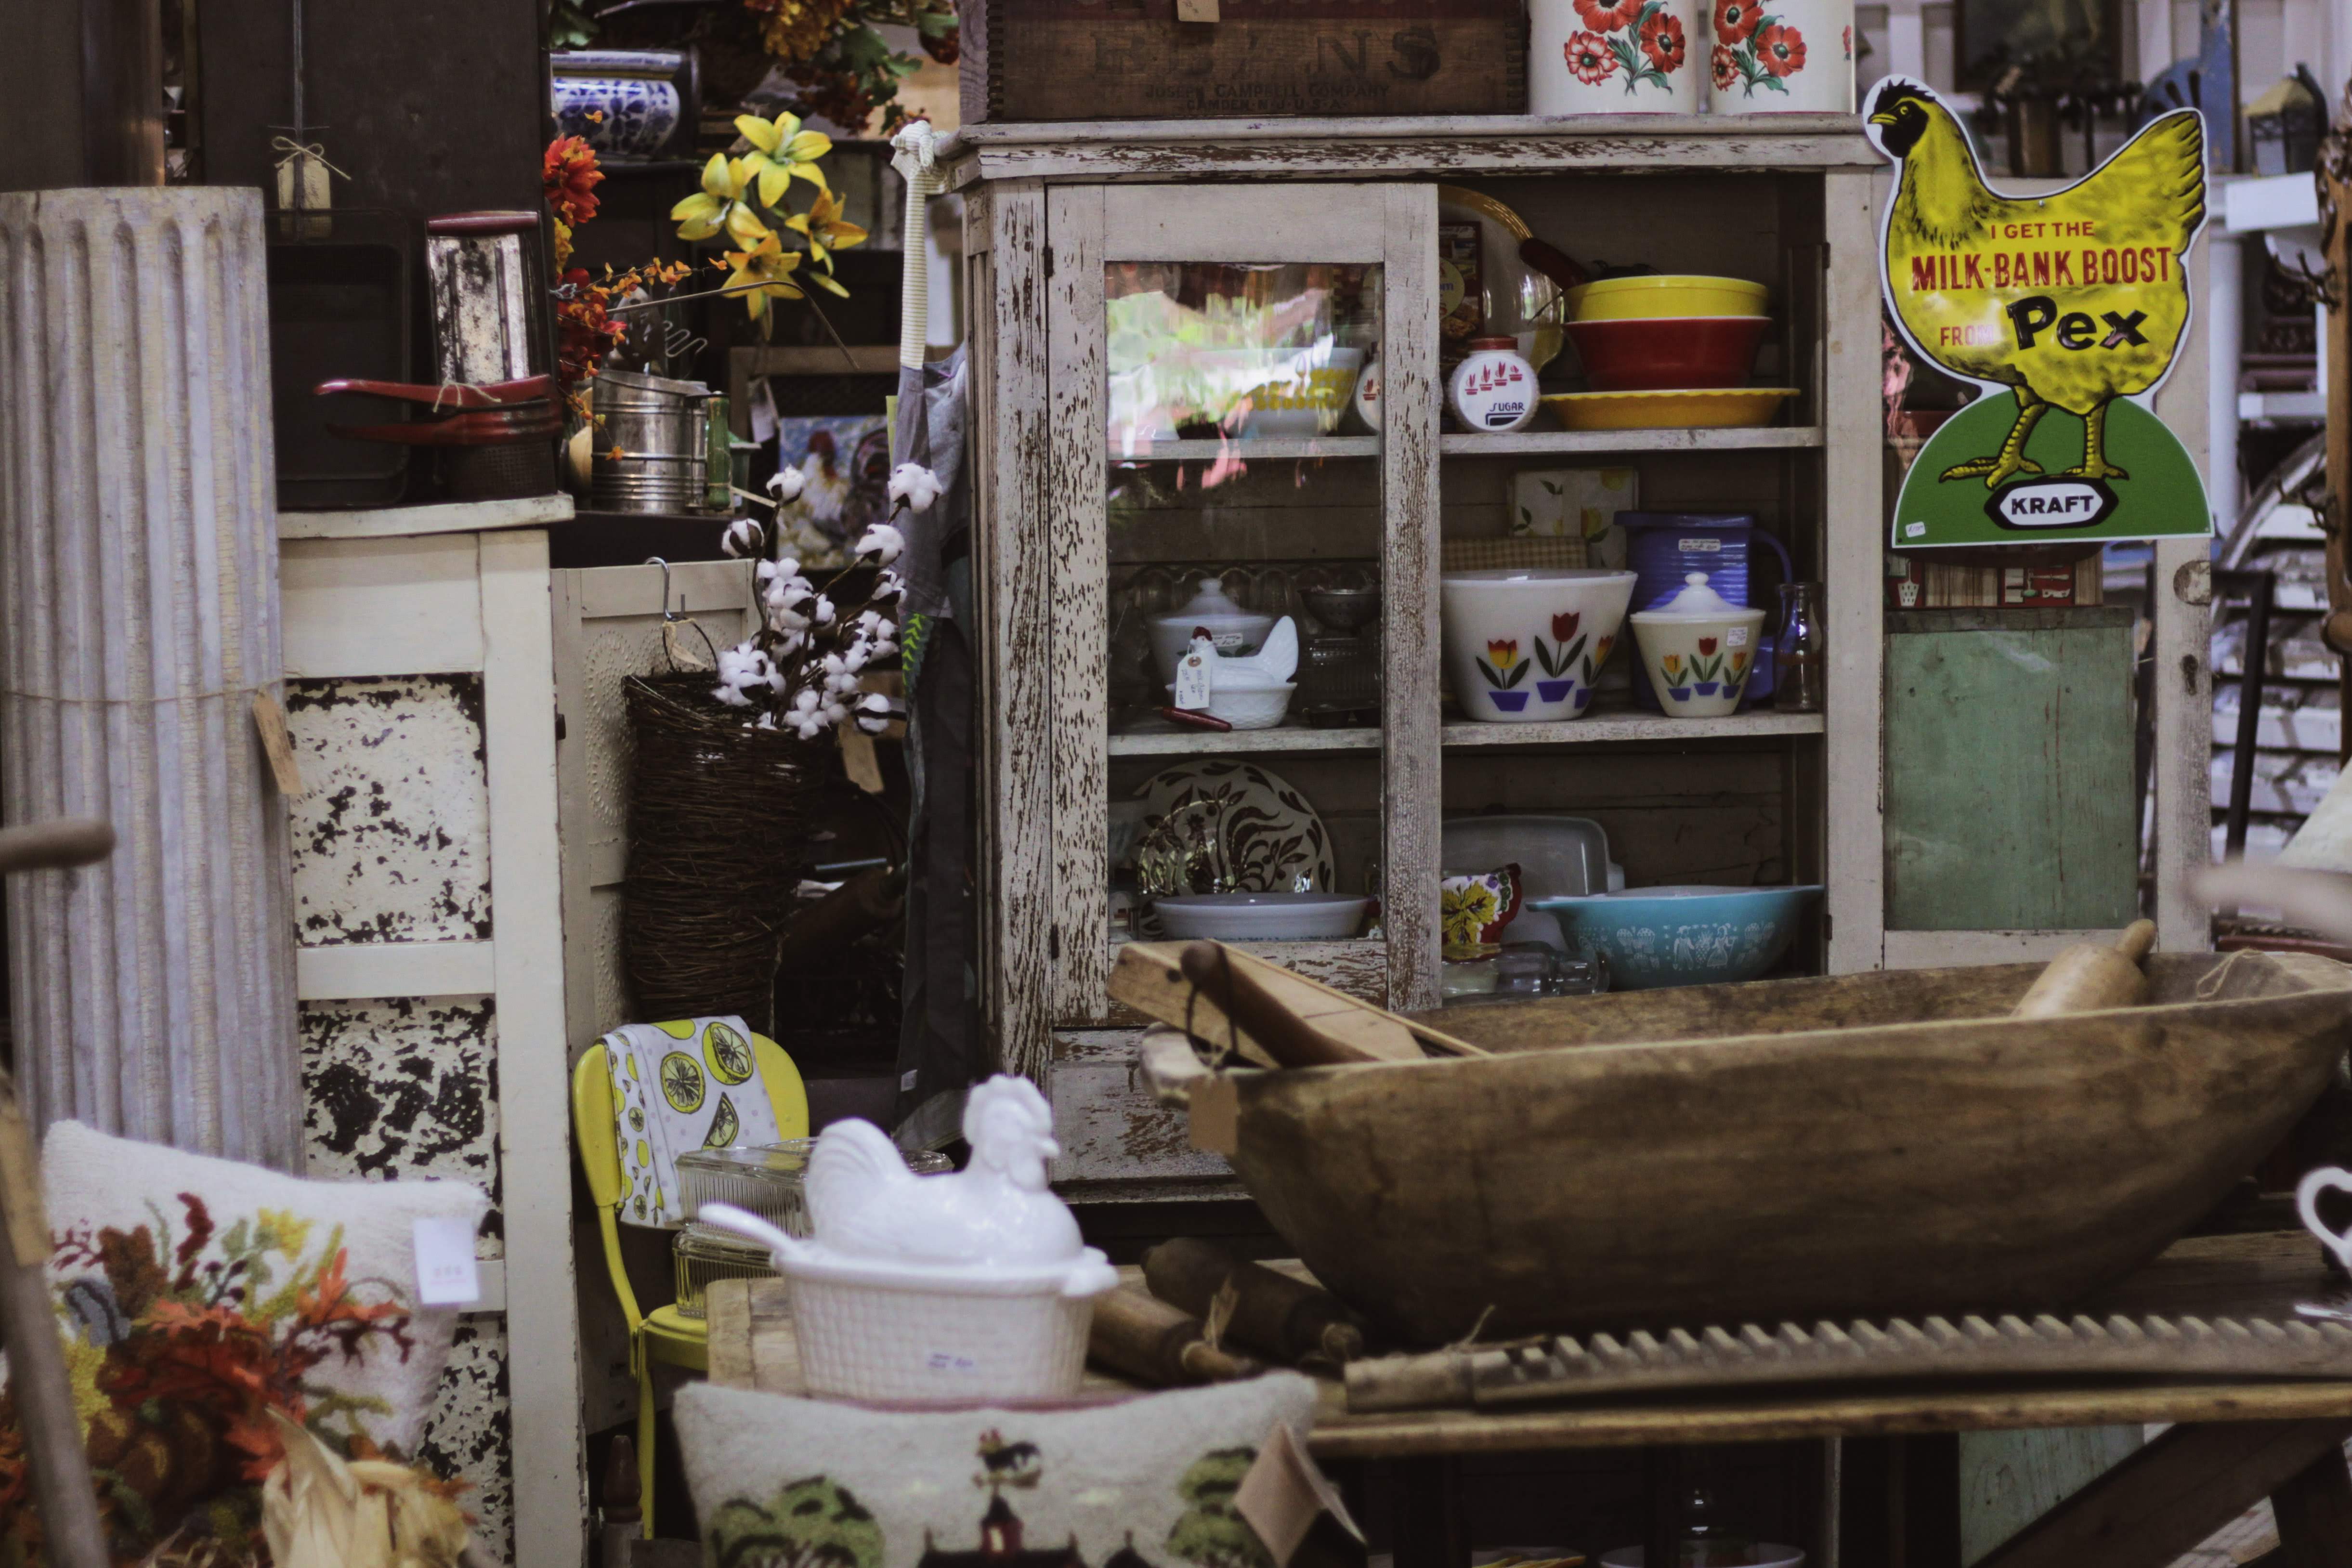 Thistle Patch: Vintage Garden and Antiques has a great selection of salvage items, antiques and artisan made products.